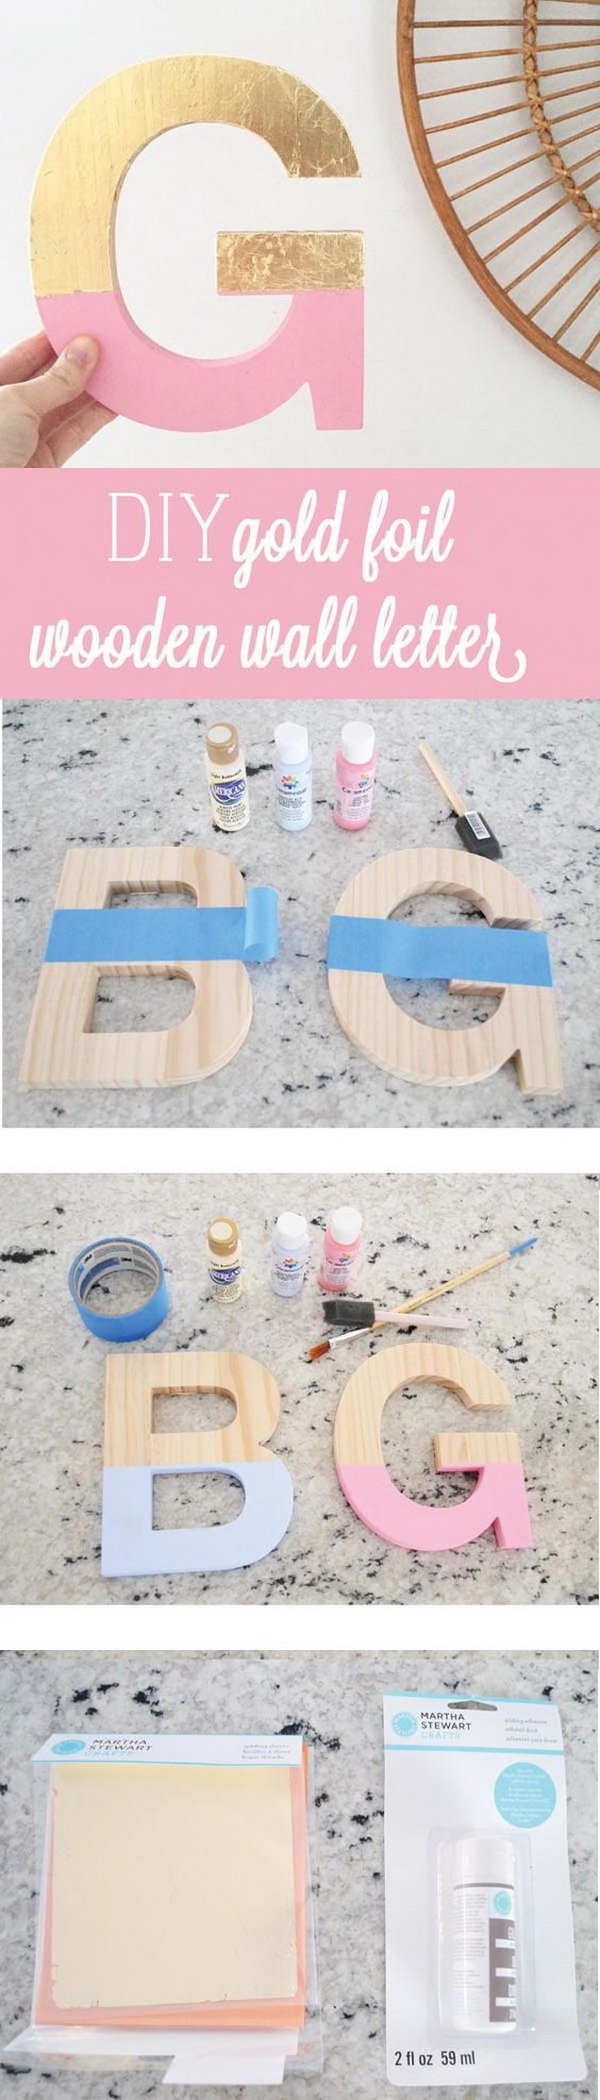 Foil Wooden Letter. Super cute and relatively easy! Look great in kid